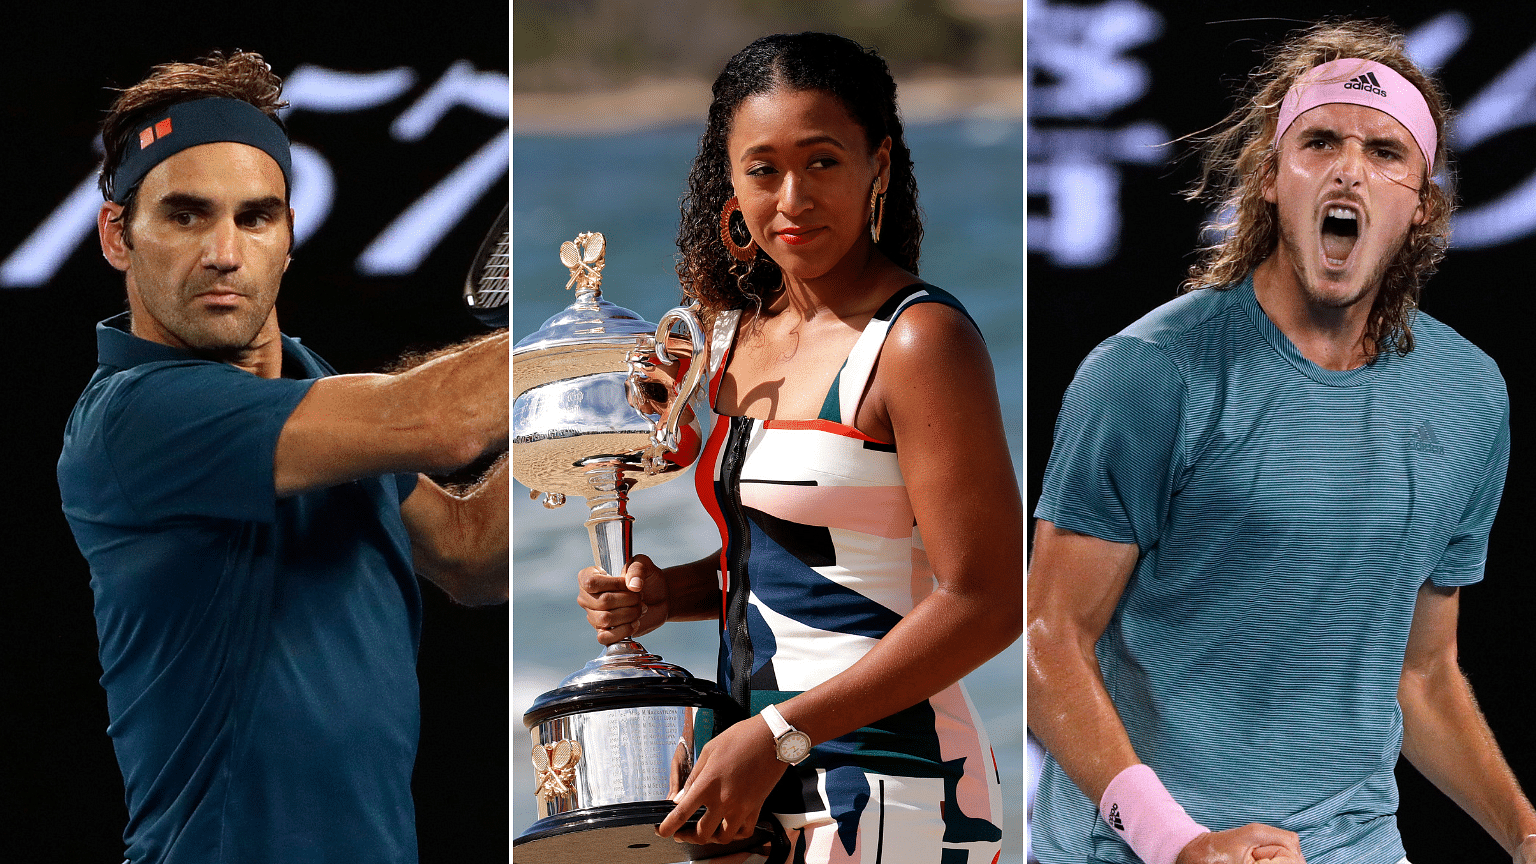 Roger Federer, Naomi Osaka and Stefanos Tsitstipas during and after the Australian Open.